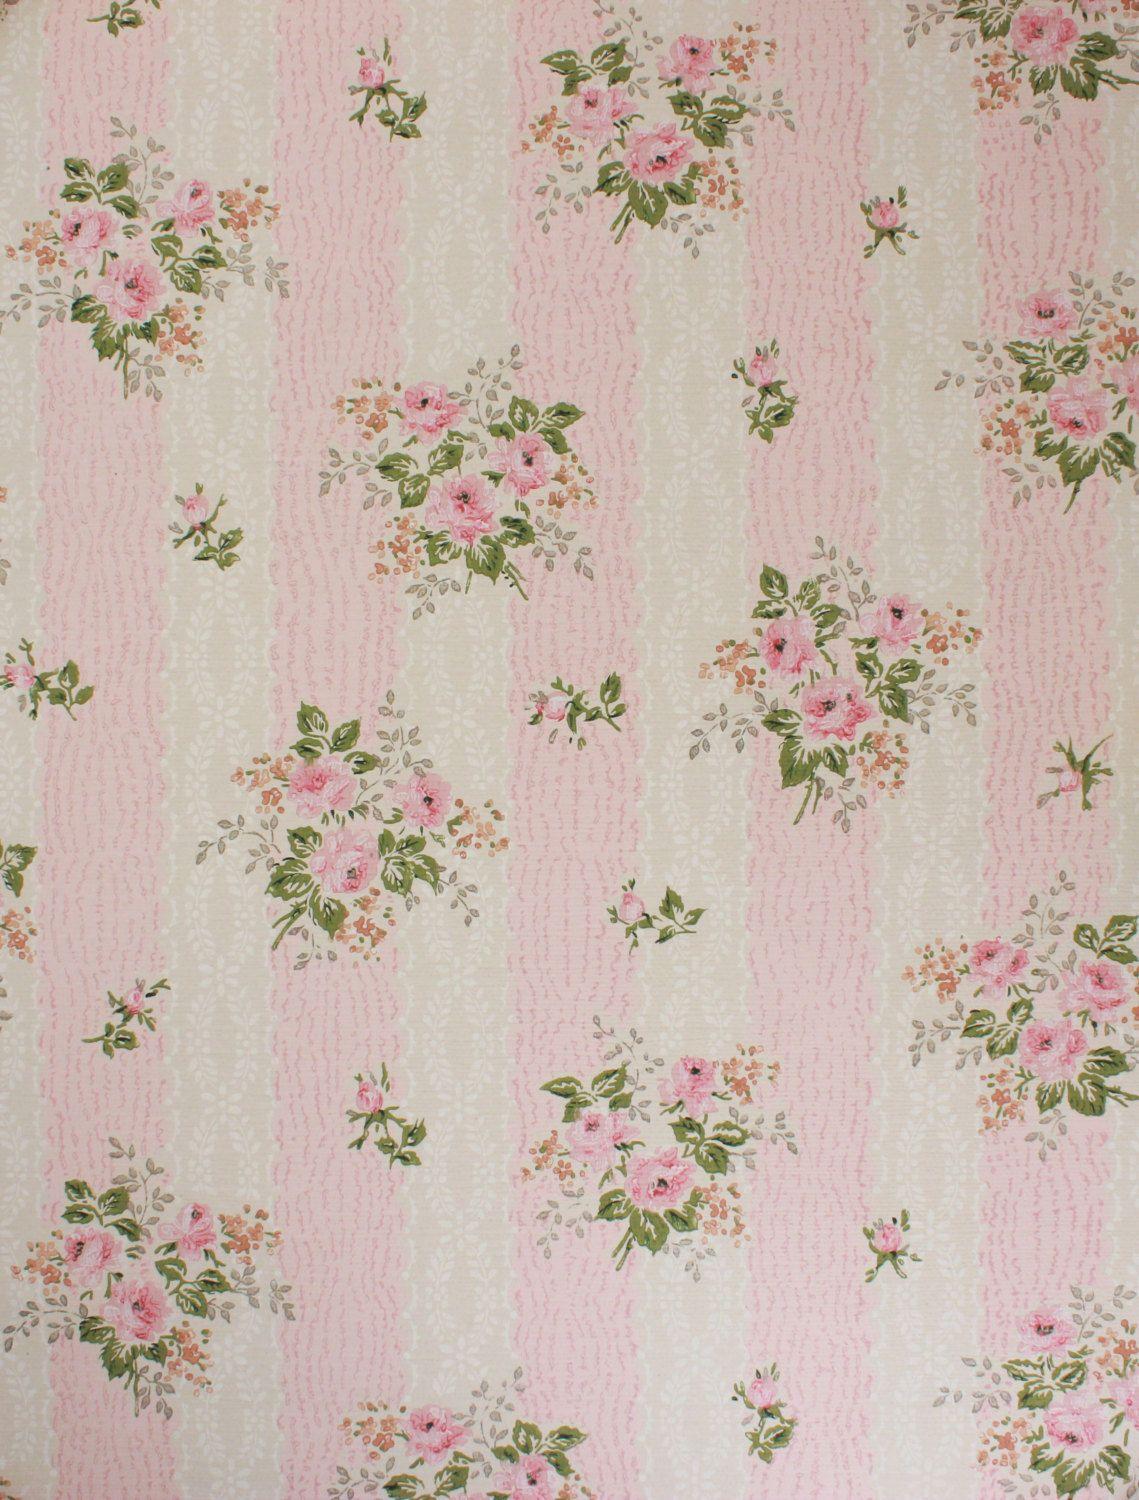 1950's Vintage Wallpaper Pink Roses on Pink and White Lace